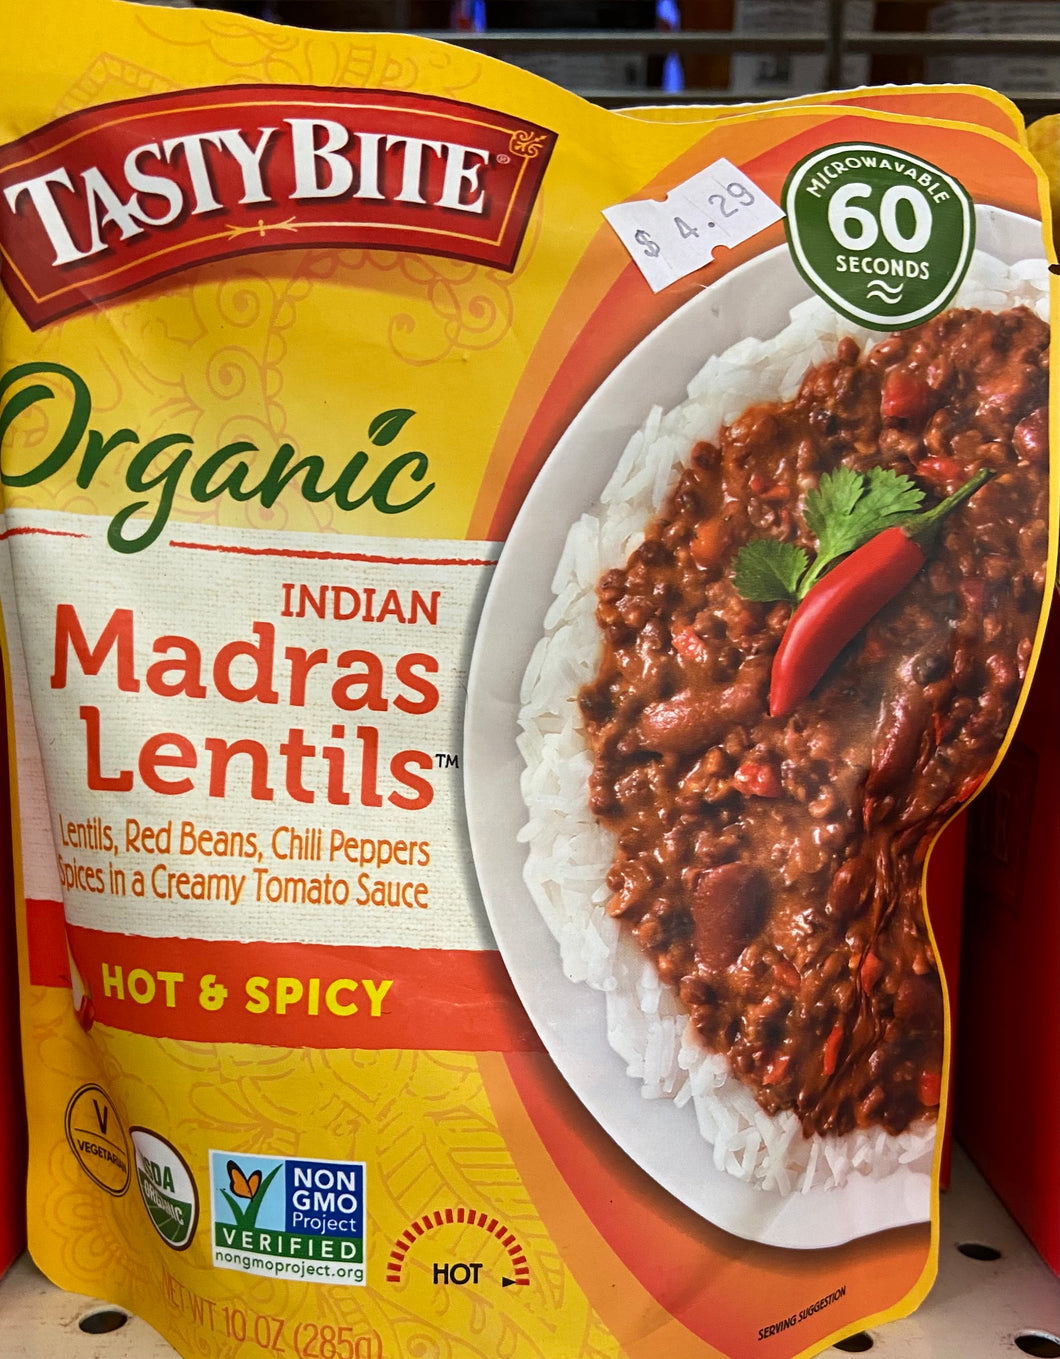 Sides, Indian Madras Lentils, Hot & Spicy, Microwavable Pouch, Tasty Bite Organic